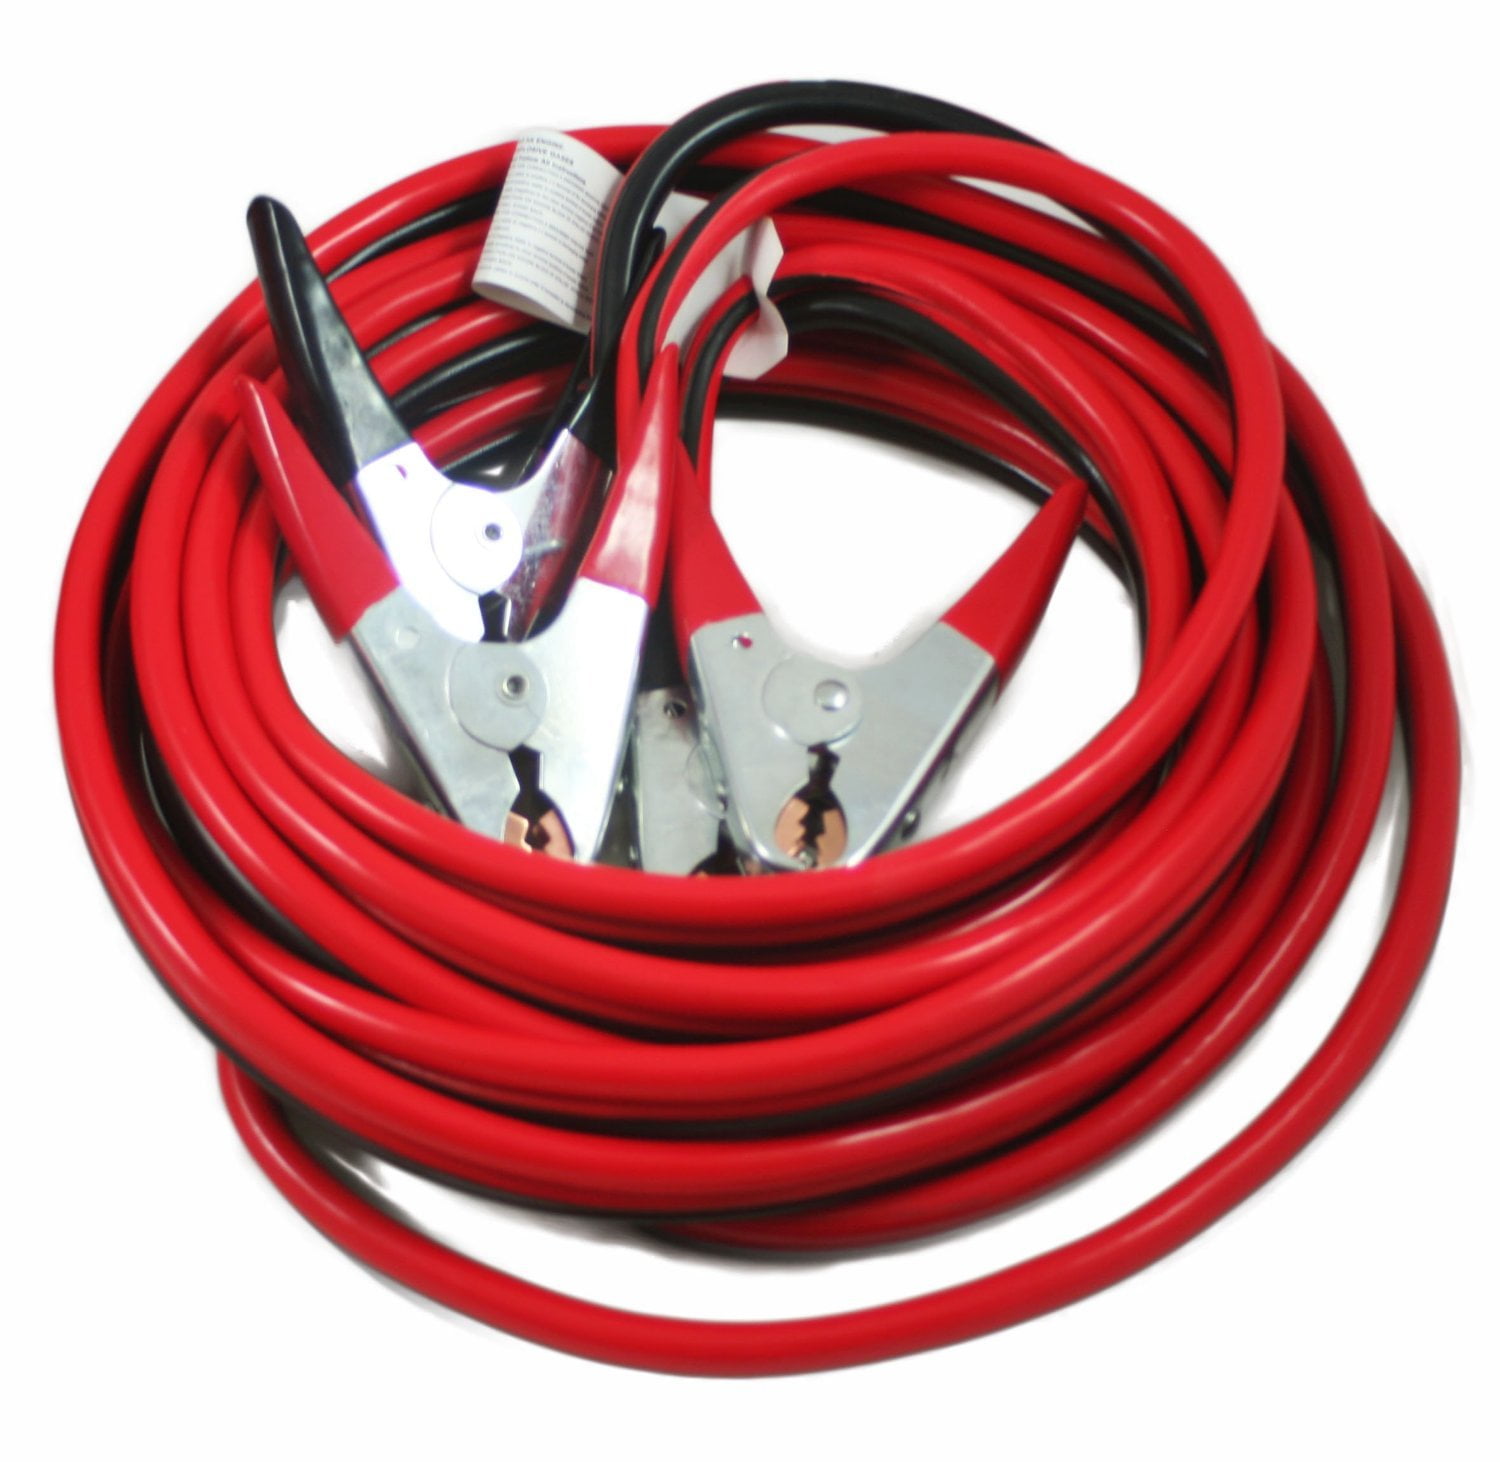 Car Booster Cables ABN Jumper Cables 25’ Feet Long 2-Gauge 600 AMP Motorcycle 